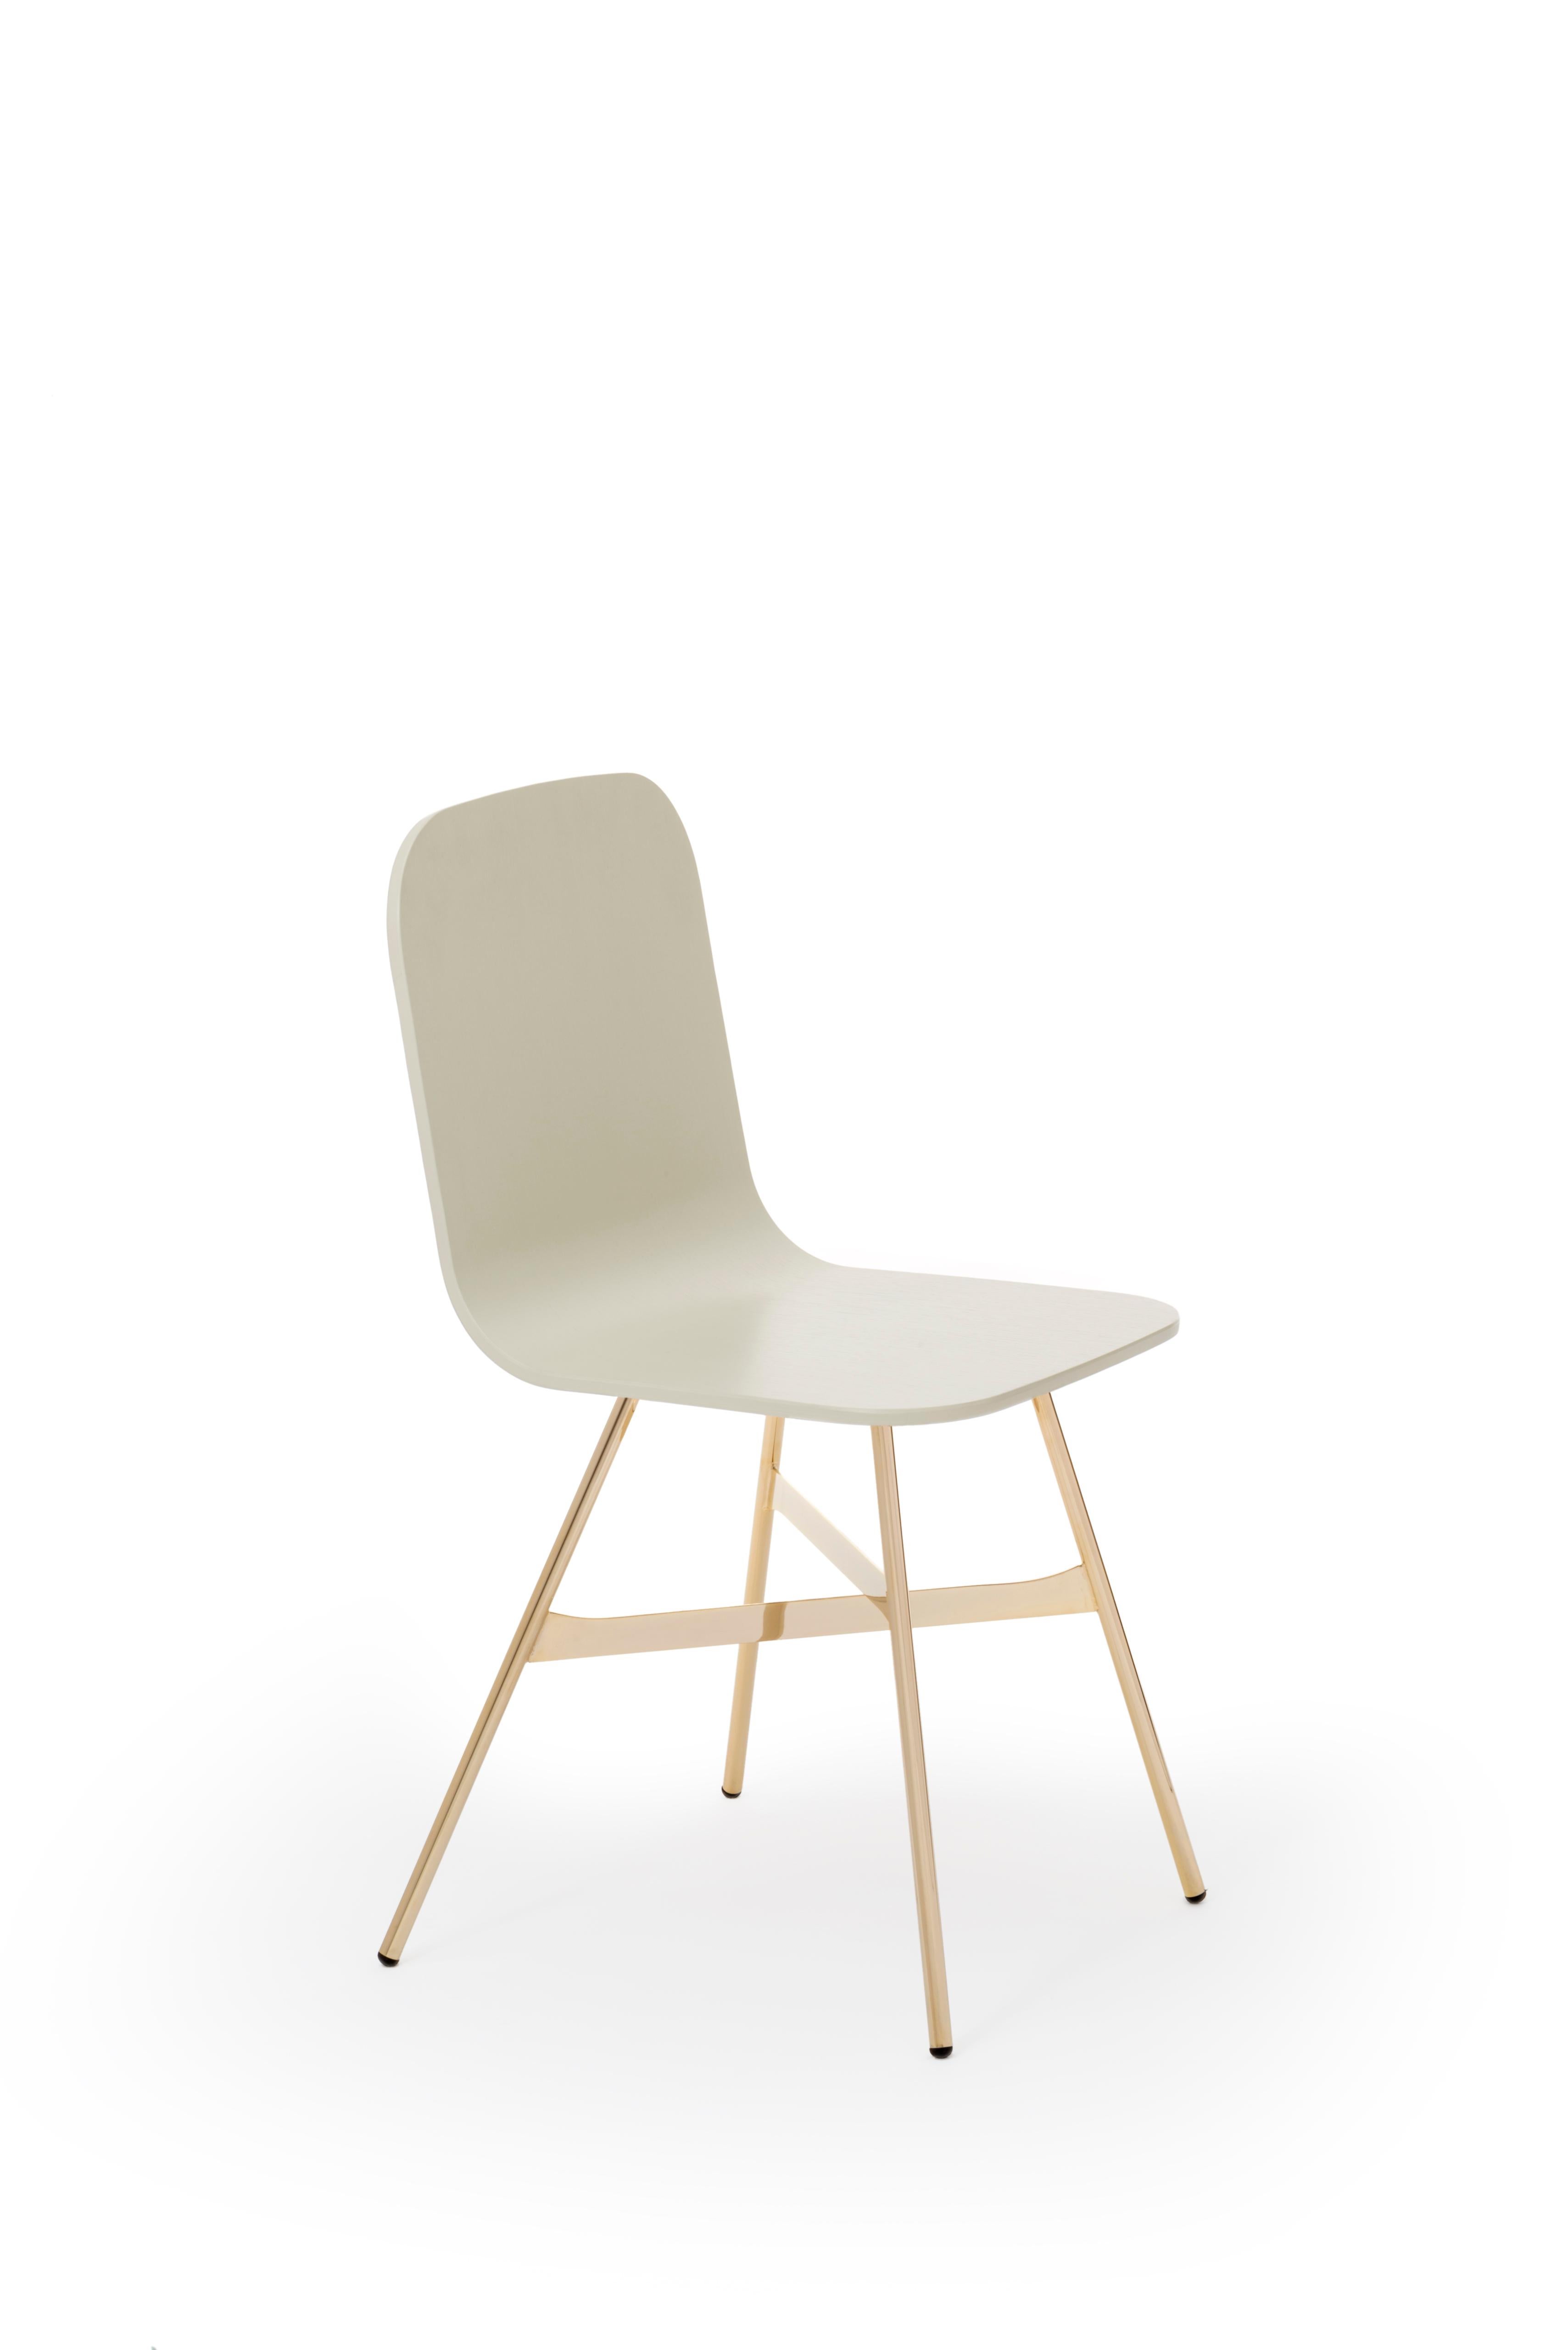 Tria Simple Chair Golden Legs Upholstered in Fine Palm Green Wool, Made in Italy For Sale 5